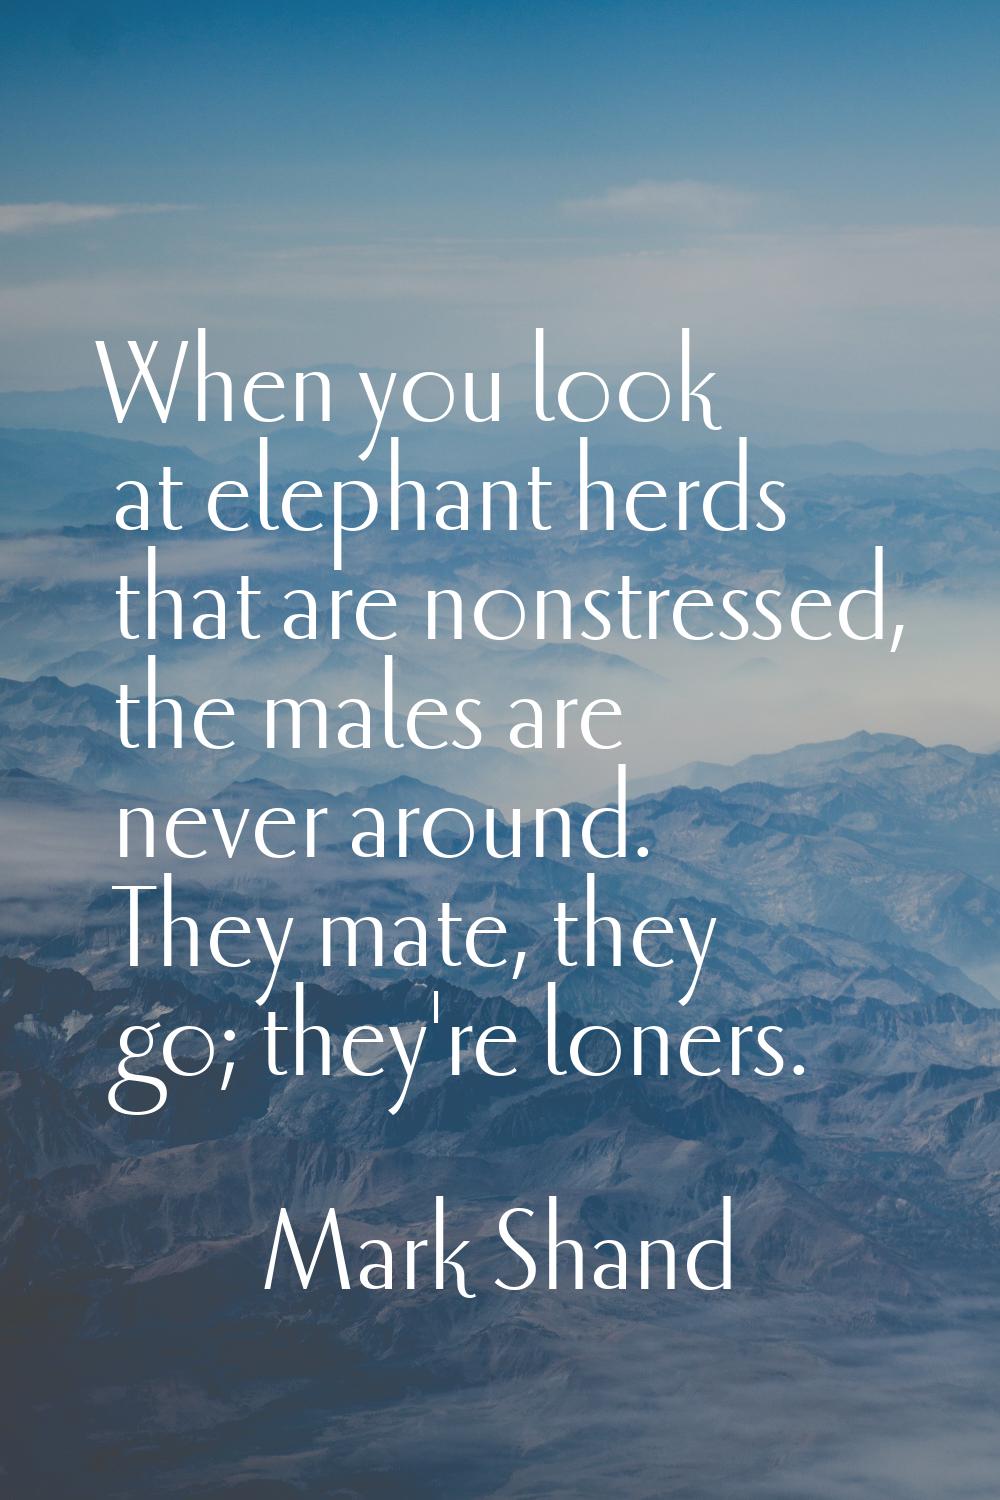 When you look at elephant herds that are nonstressed, the males are never around. They mate, they g